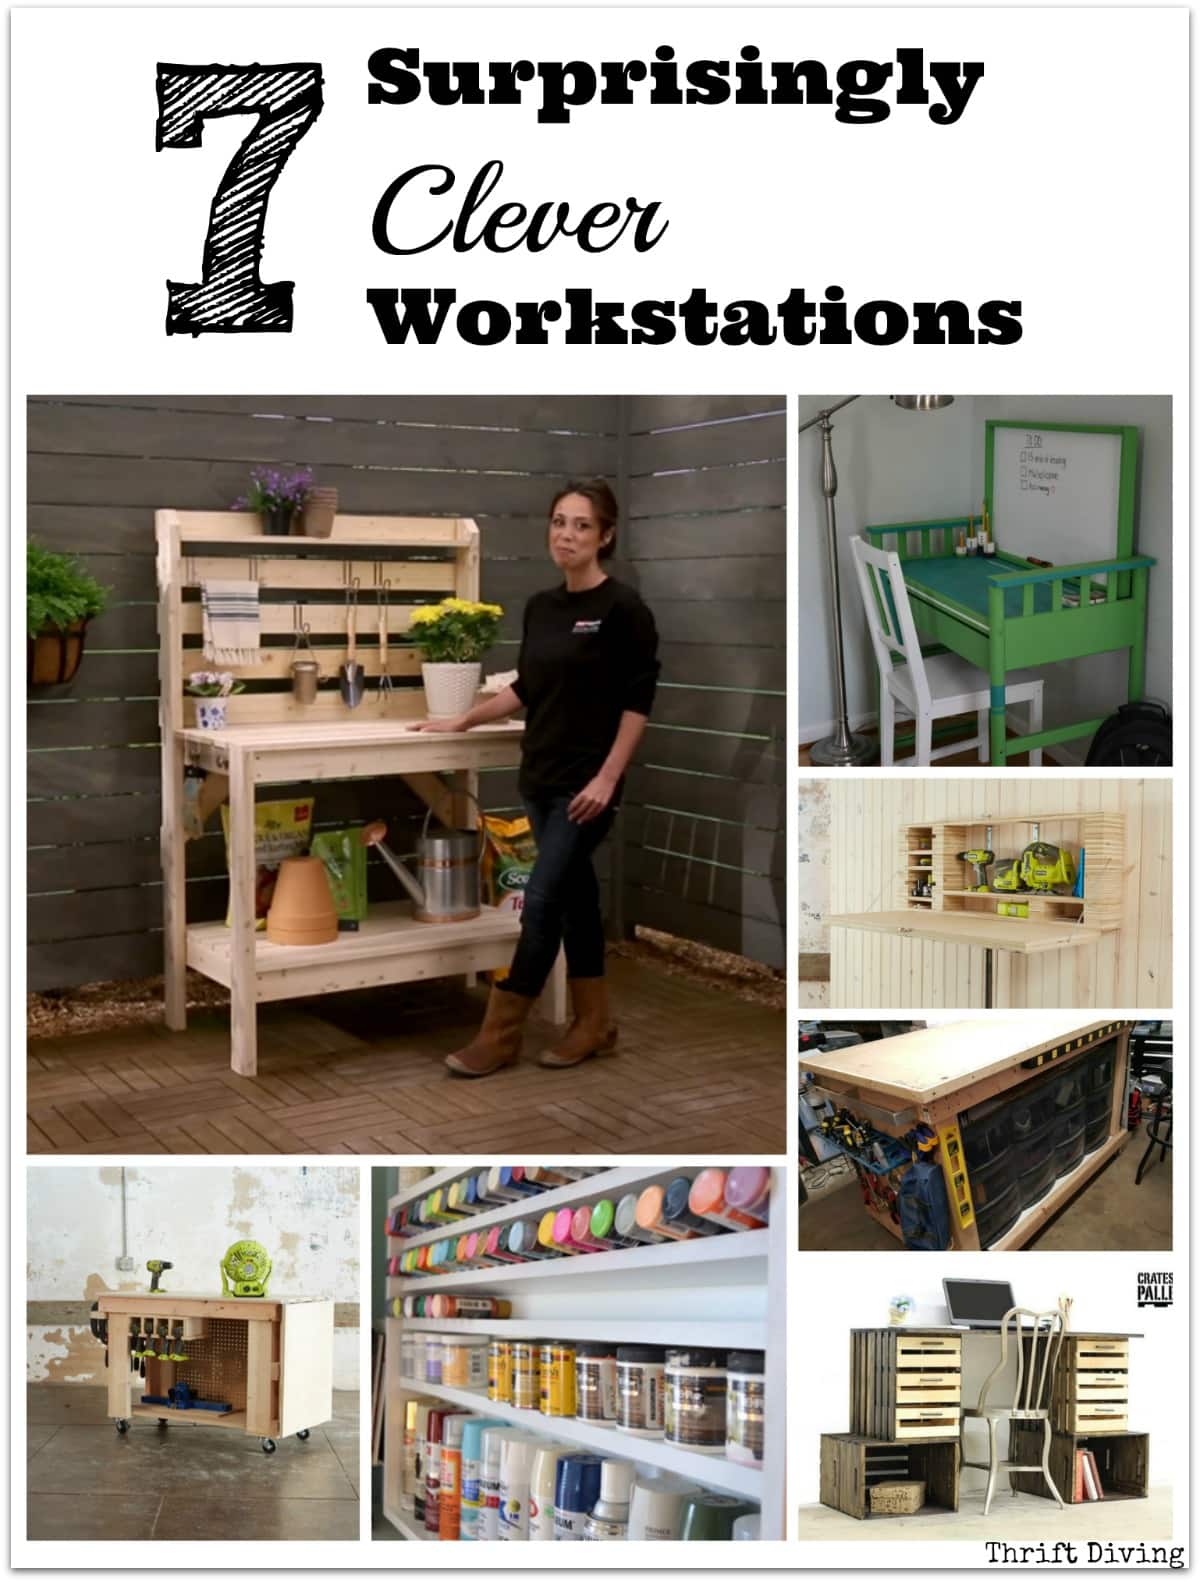 7 Surprisingly Clever Workstations - Check out these projects if you're tired of cookie cutter DIY workstations! - ThriftDiving.com